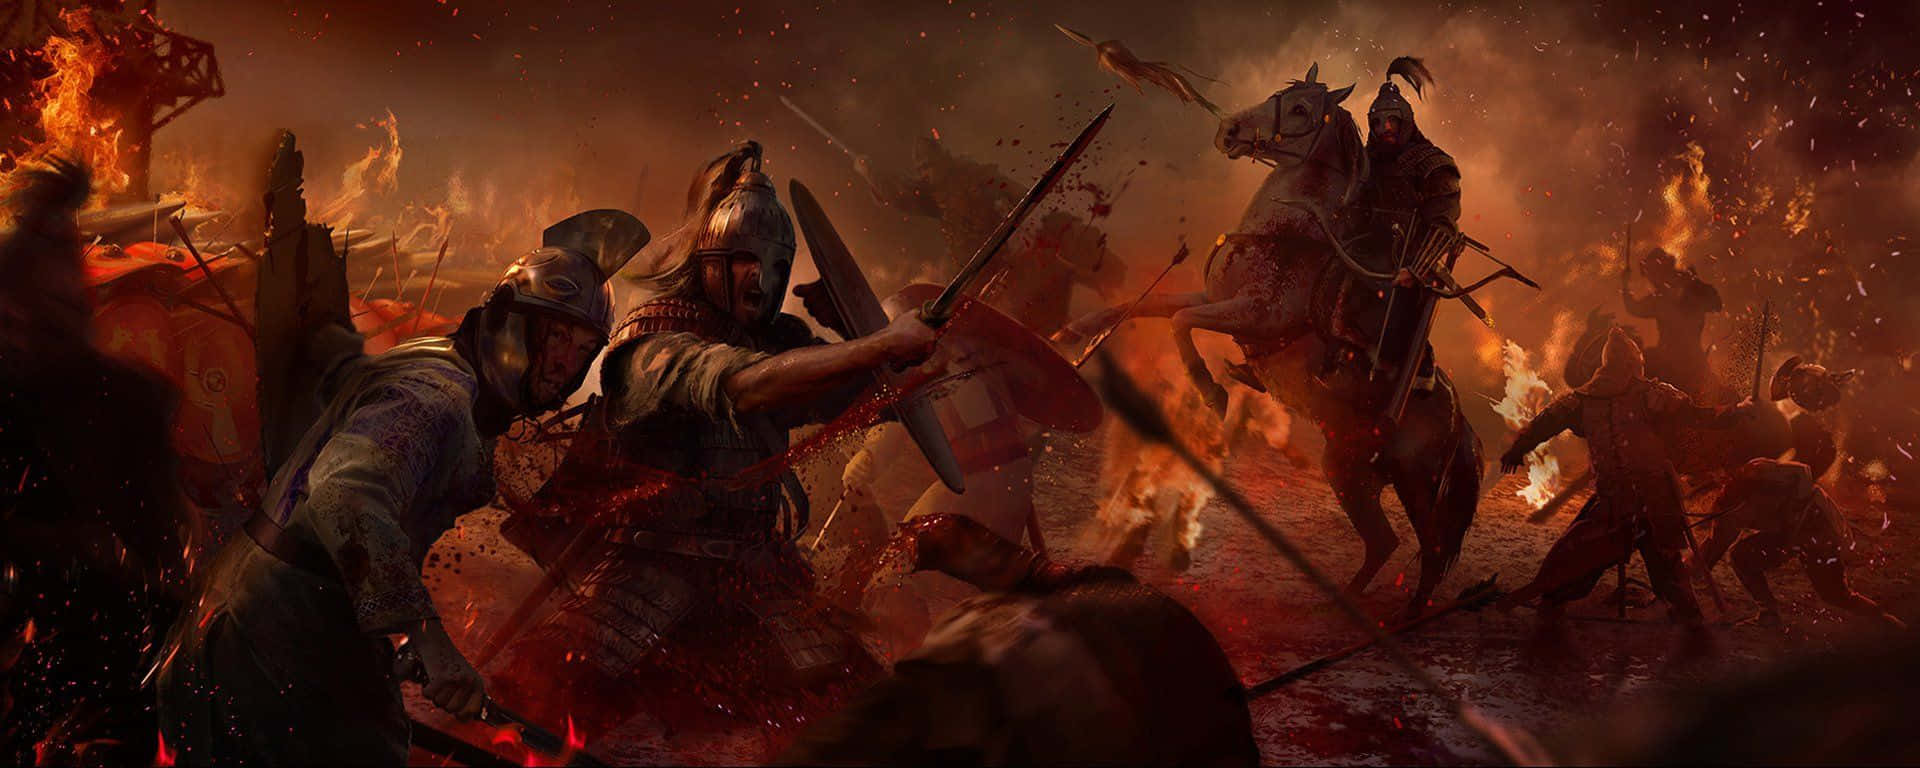 Unleash your inner warrior and battle in the epic historical strategy game Total War: Attila.